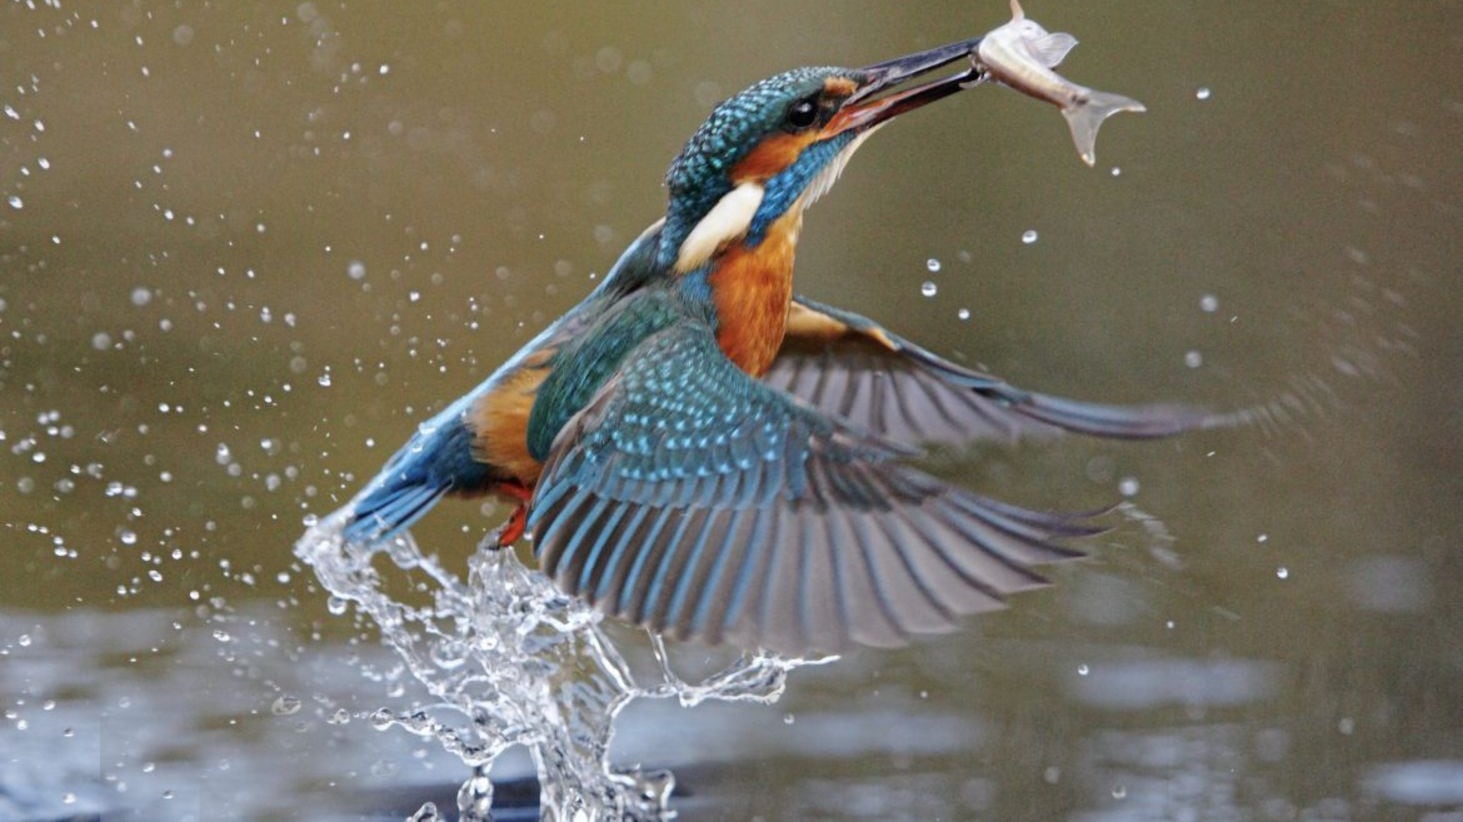 Kingfisher, Alcedo atthis, is found in all counties of Ireland, living on small fish and larger aquatic insects 